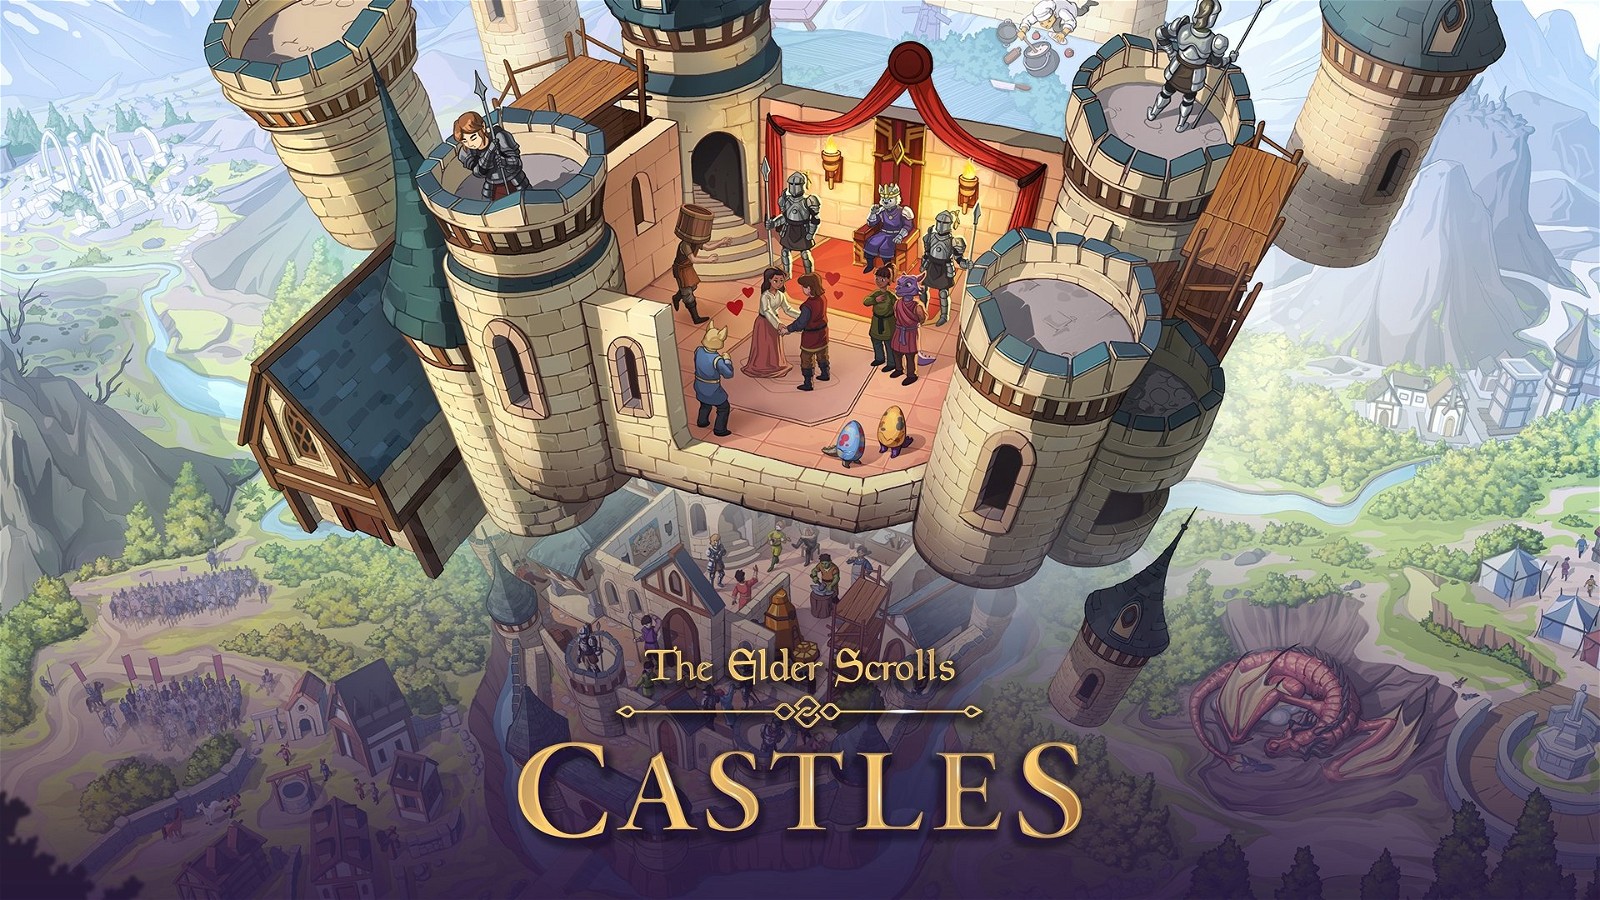 Bethesda released The Elder Scrolls Castles out of nowhere without any due announcements